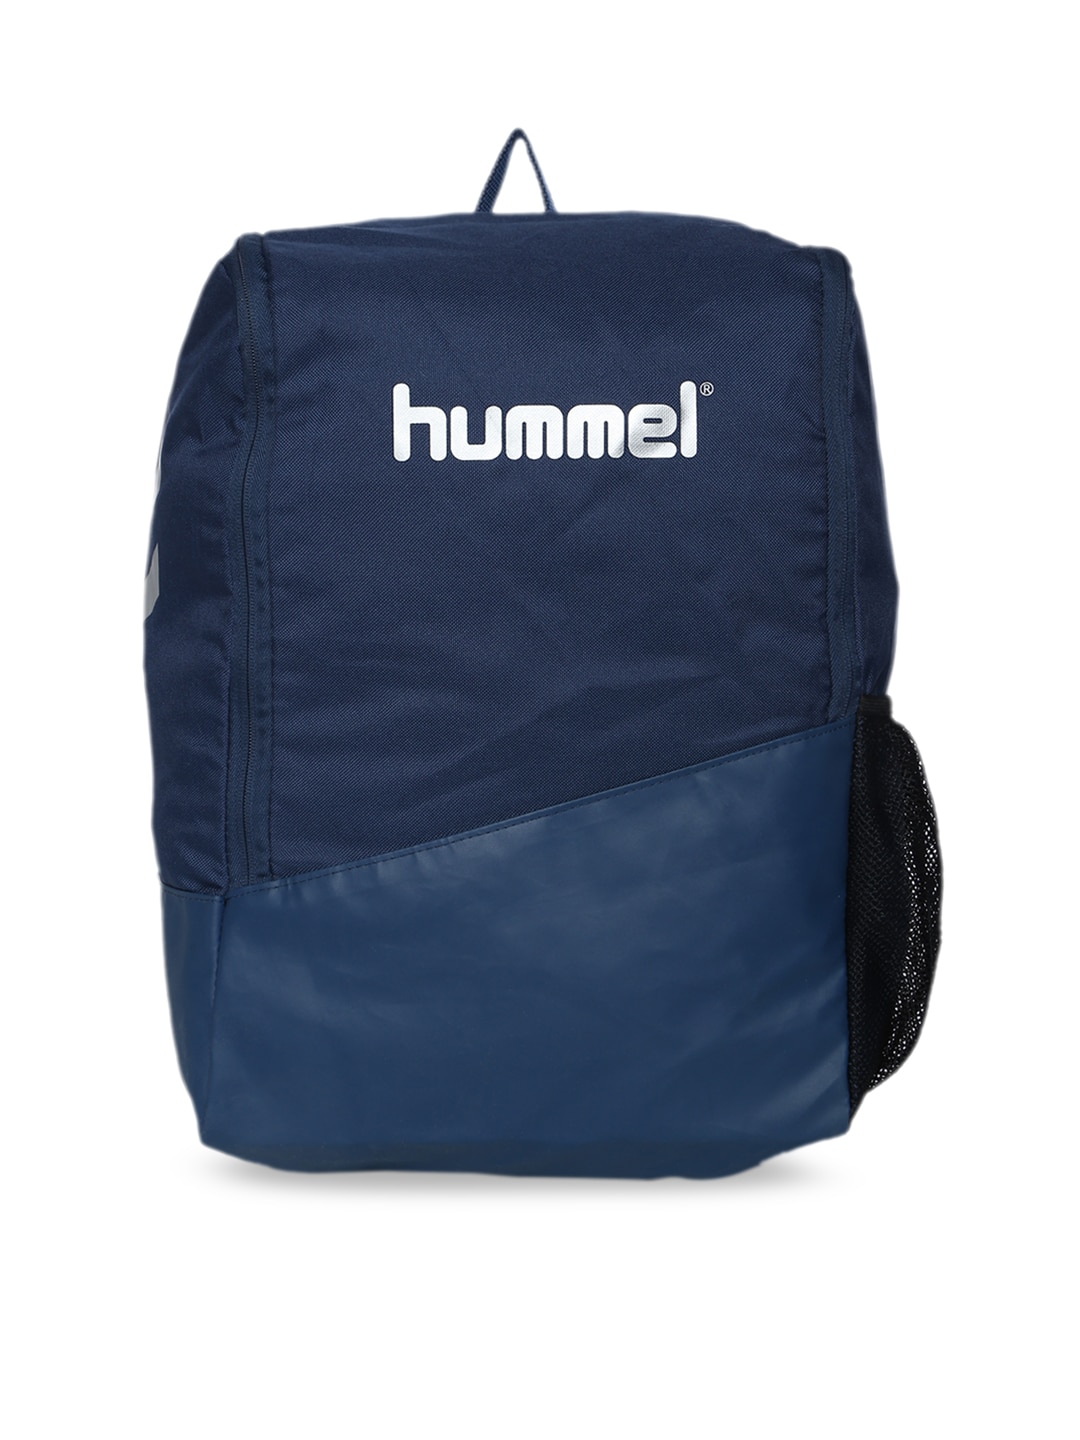 hummel Unisex Blue Solid Backpack Price in India